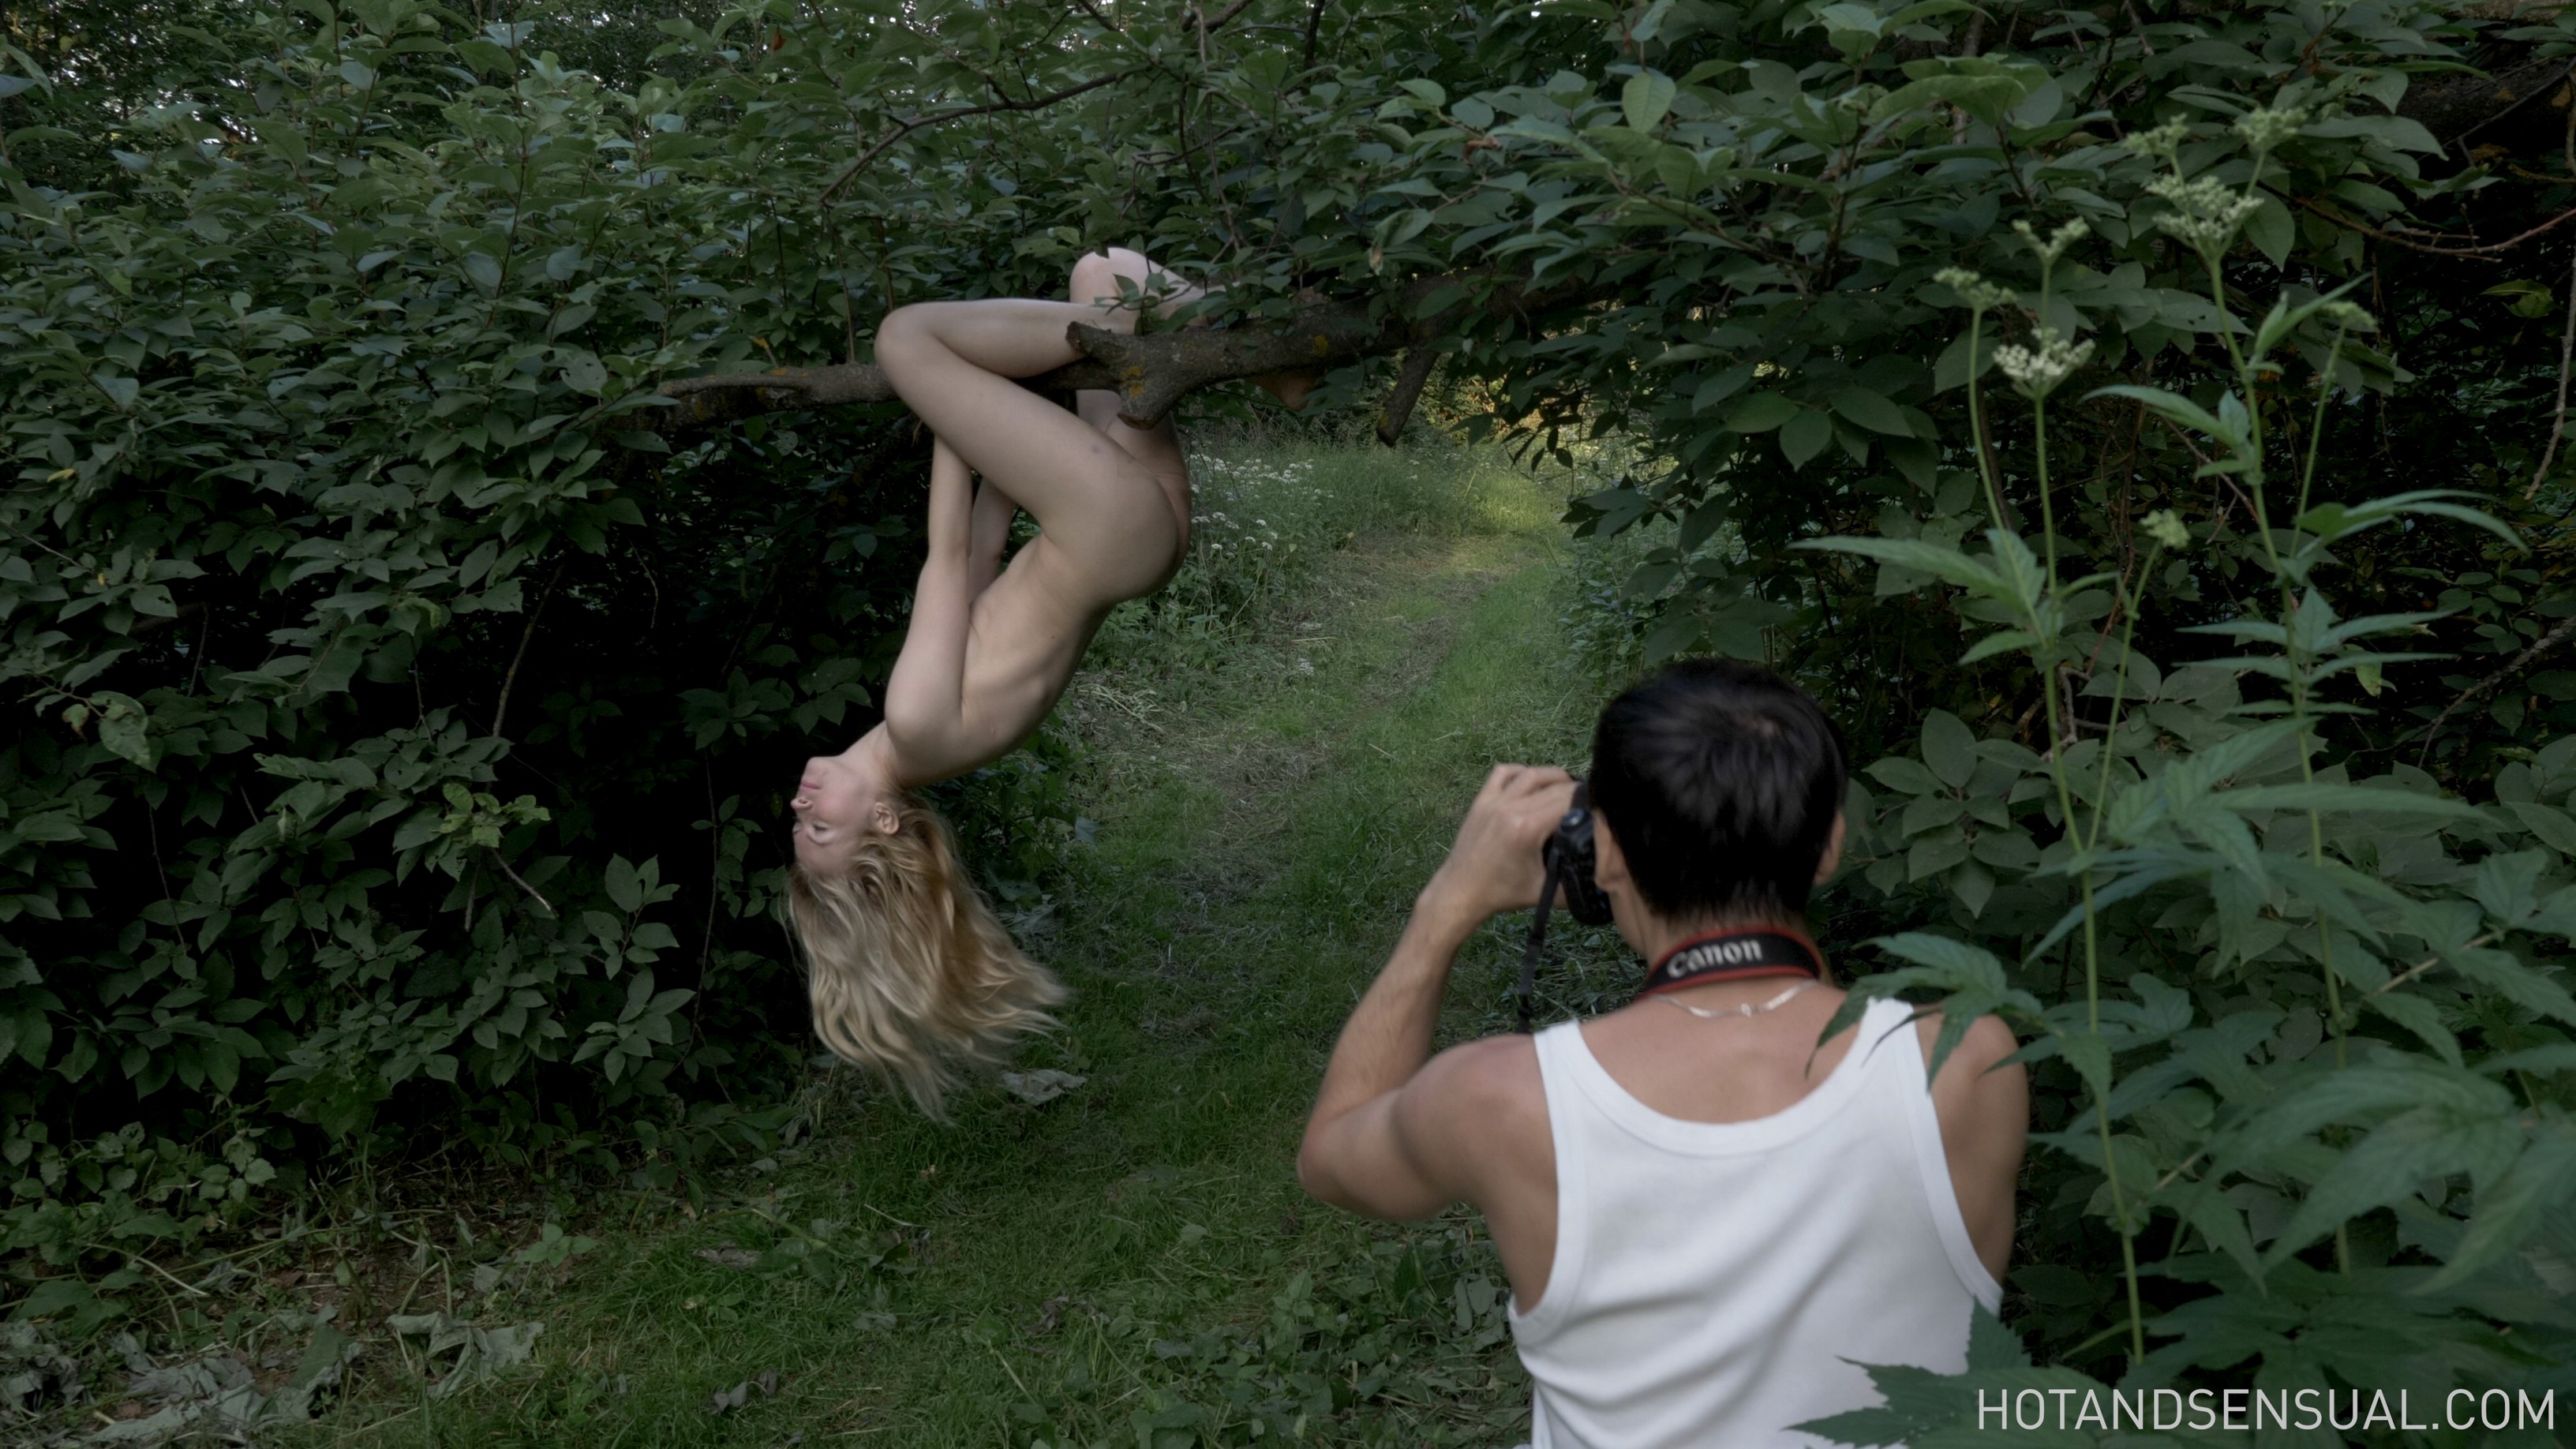 Nude photoshoot in public with crazy blonde girl